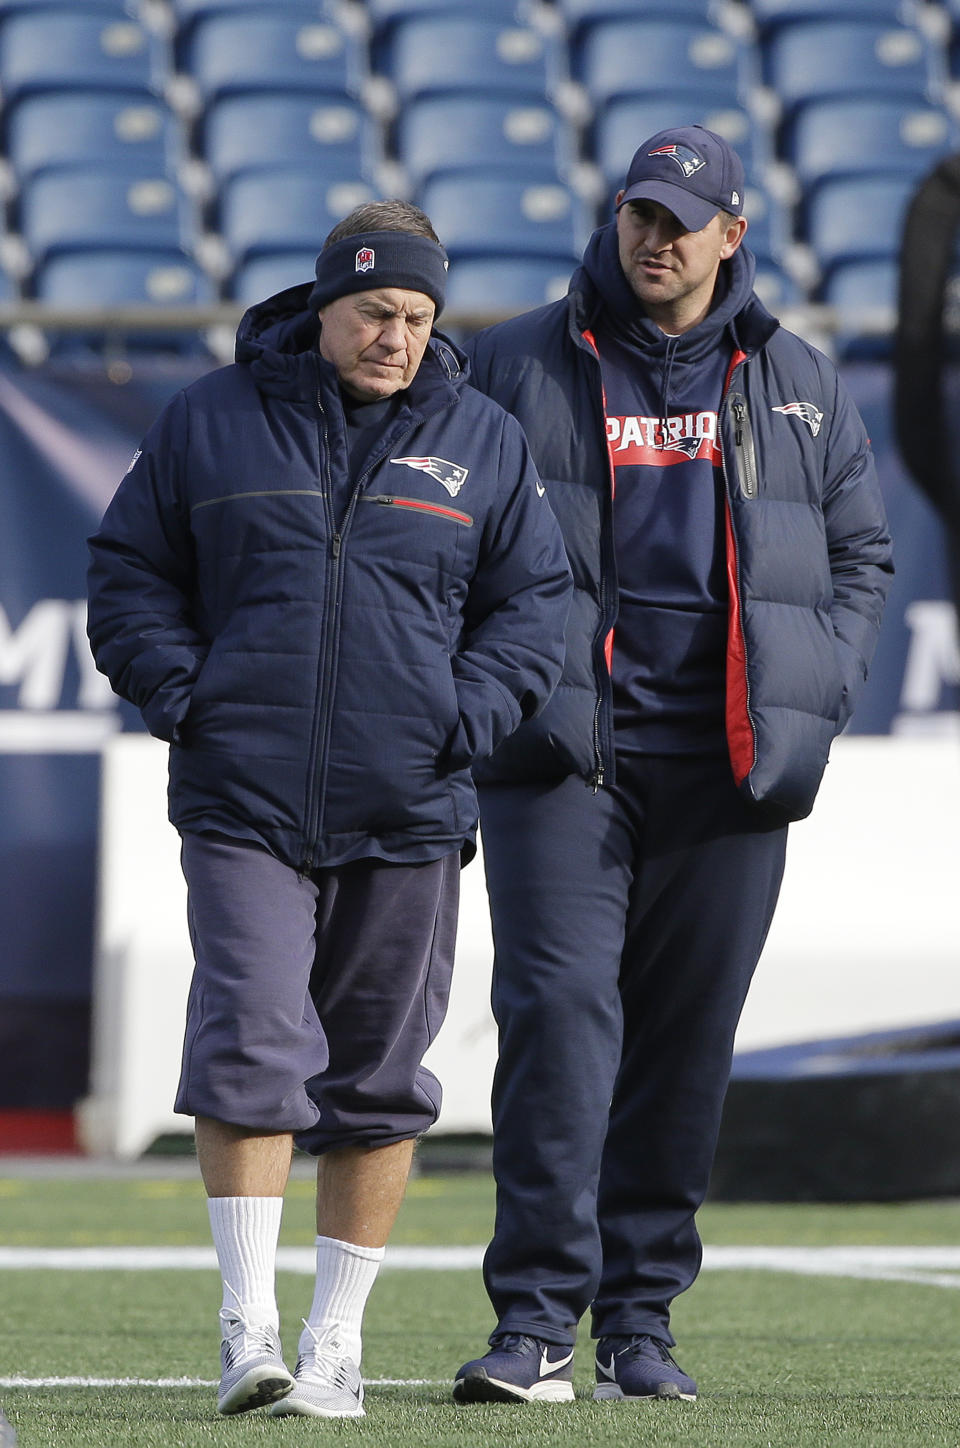 New England Patriots head coach Bill Belichick, left, speaks with special teams coach Joe Judge, right, during NFL football practice, Thursday, Dec. 20, 2018, in Foxborough, Mass. (AP Photo/Steven Senne)